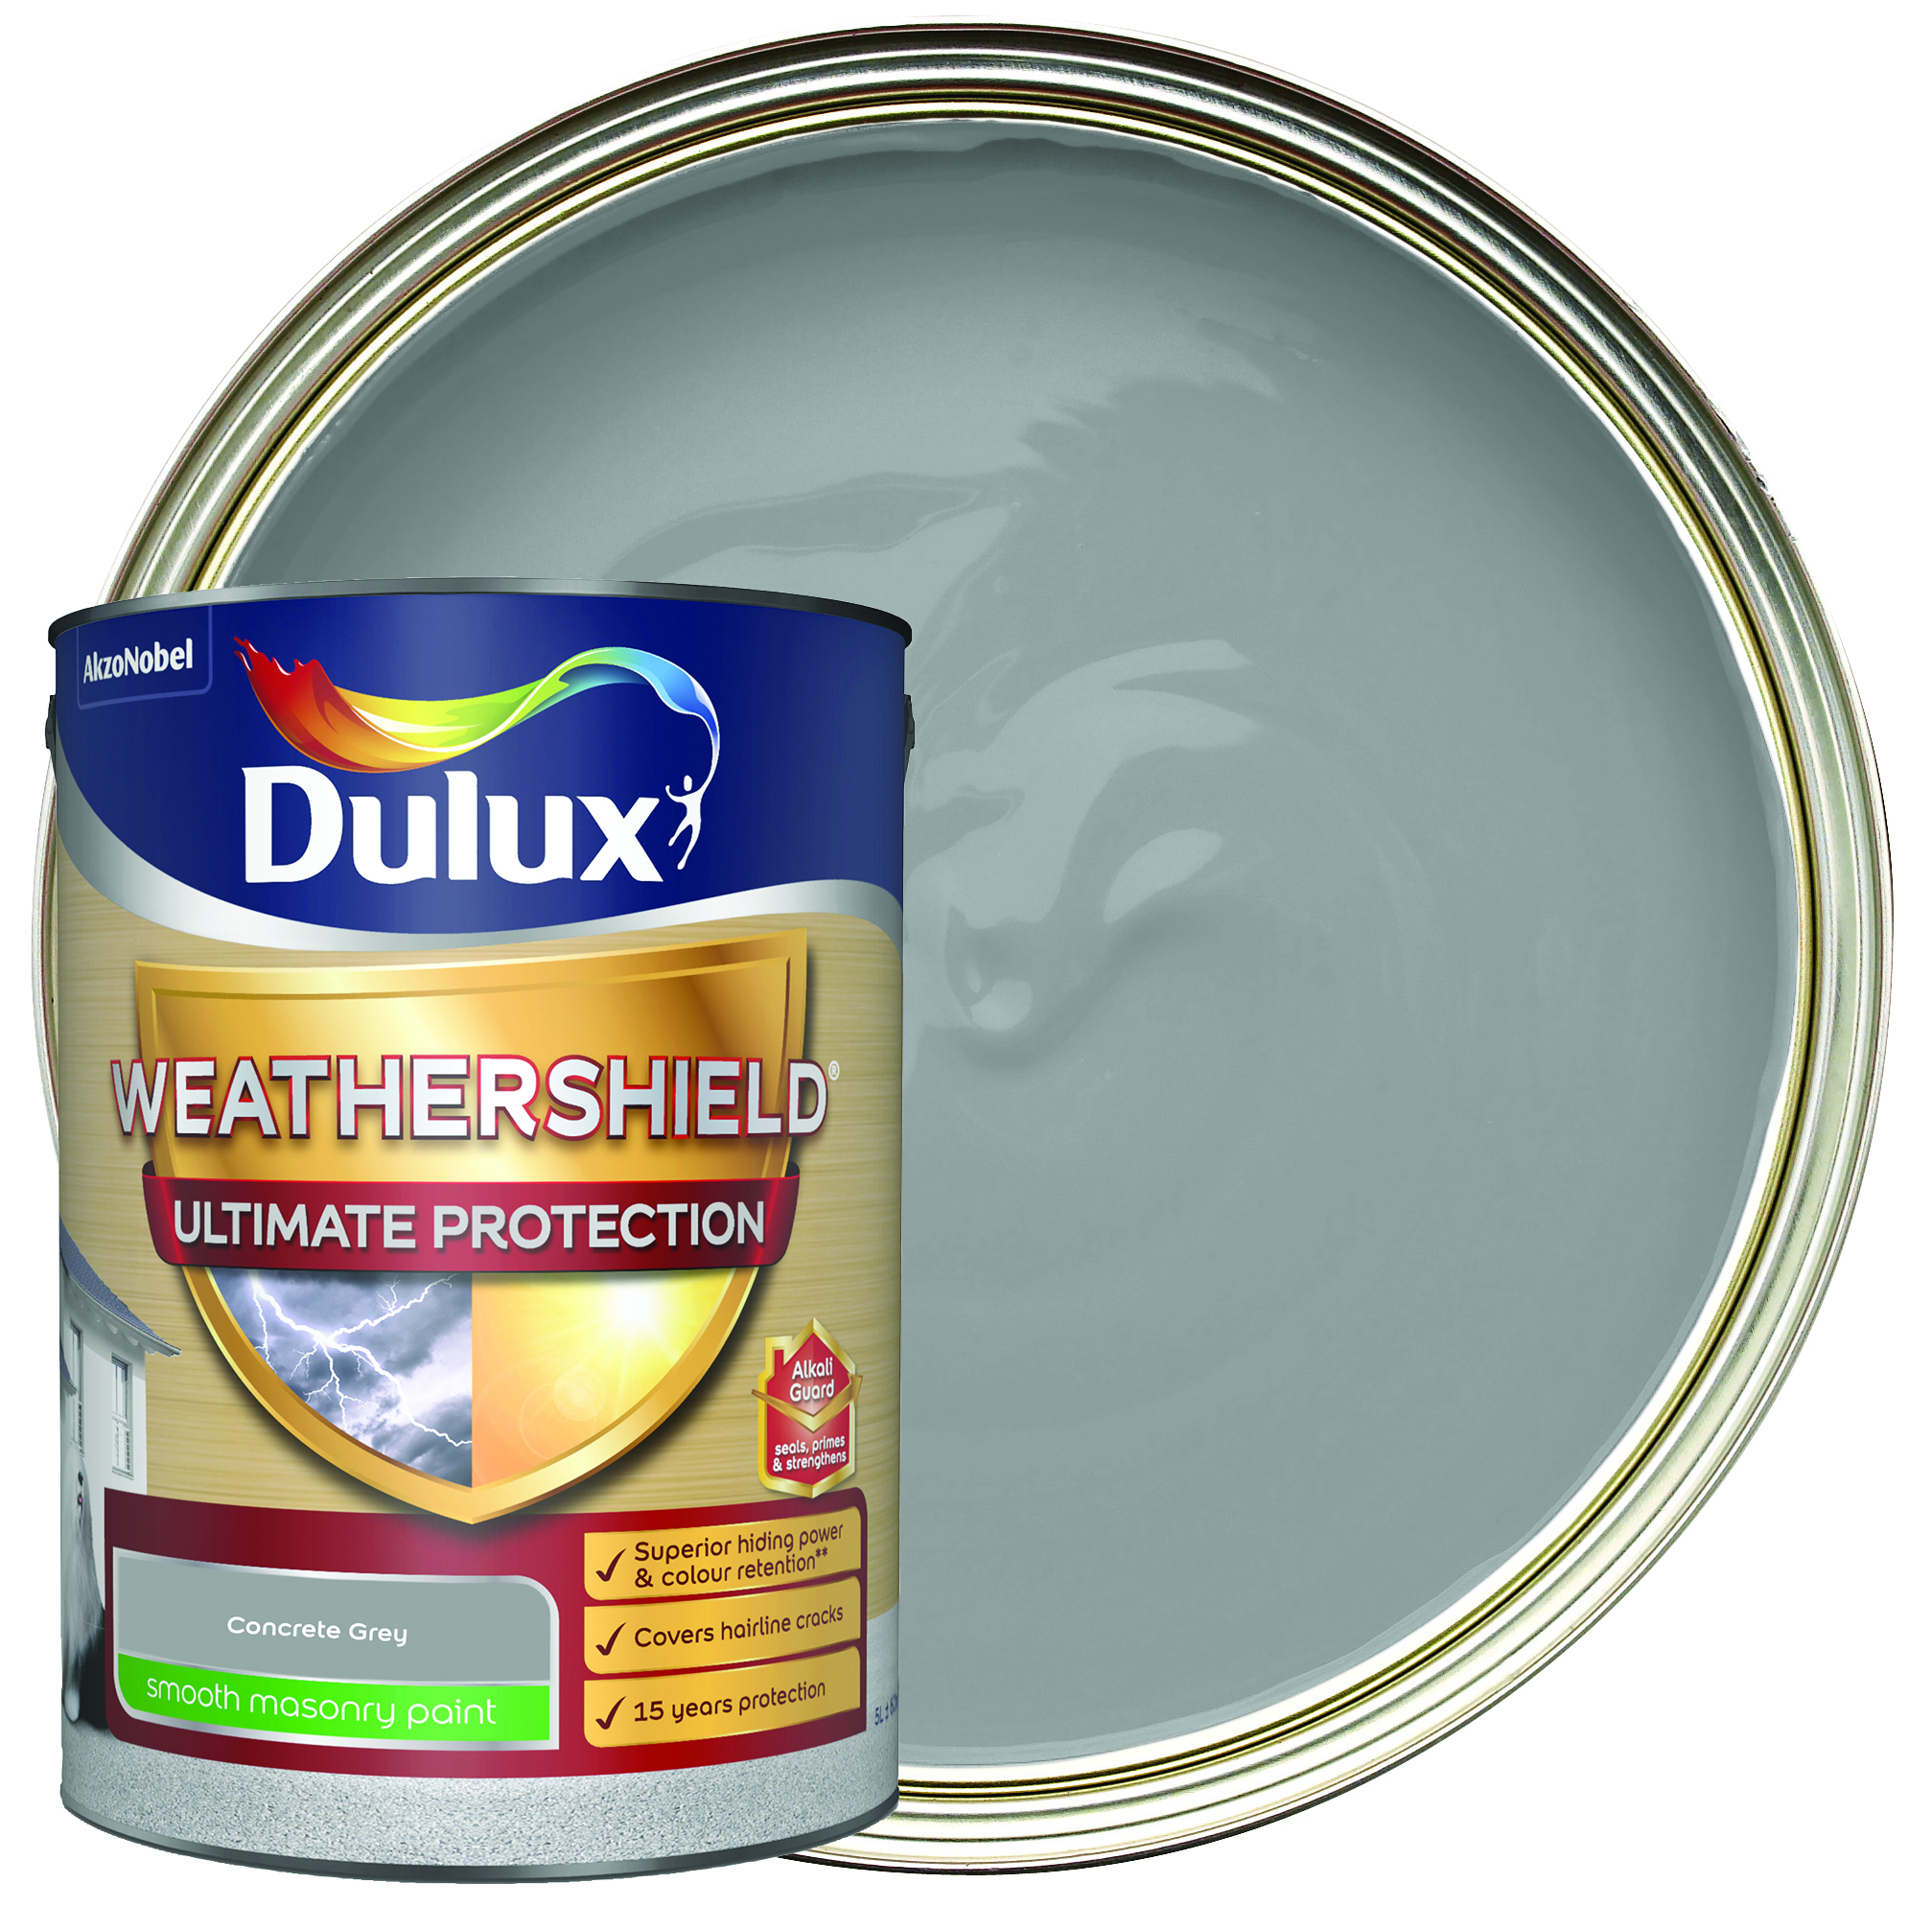 Image of Dulux Weathershield Ultimate Protect Paint - Concrete Grey - 5L